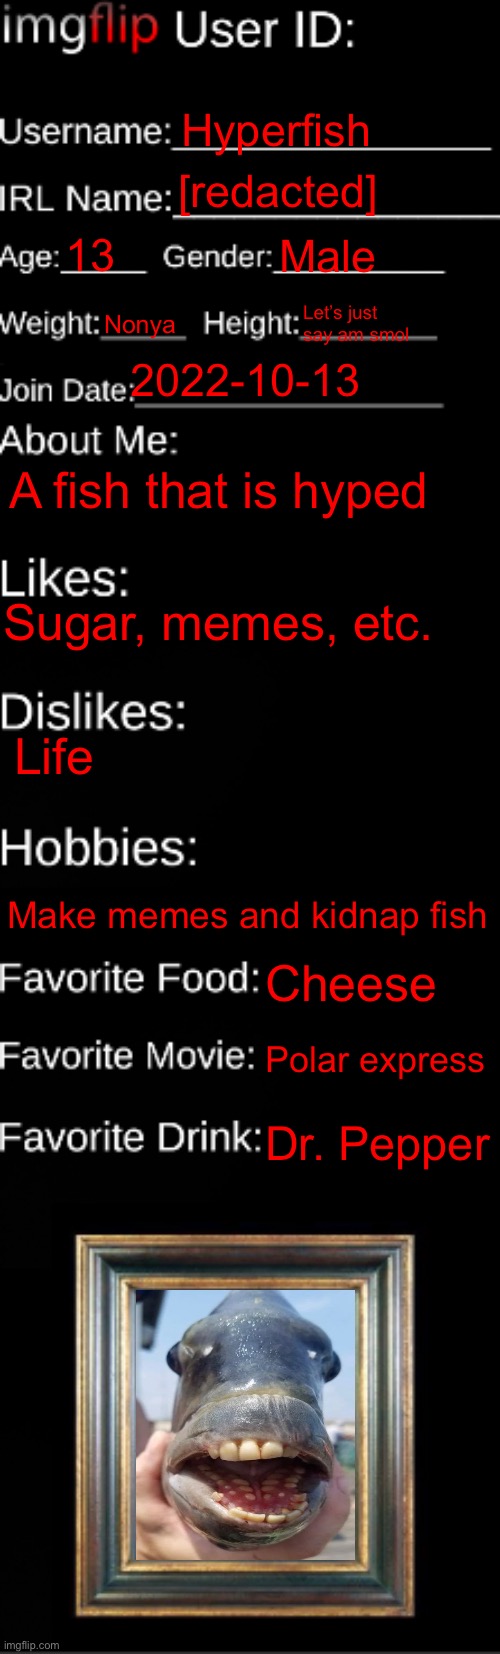 Decided to make one of these | Hyperfish; [redacted]; 13; Male; Nonya; Let’s just say am smol; 2022-10-13; A fish that is hyped; Sugar, memes, etc. Life; Make memes and kidnap fish; Cheese; Polar express; Dr. Pepper | image tagged in imgflip id card | made w/ Imgflip meme maker